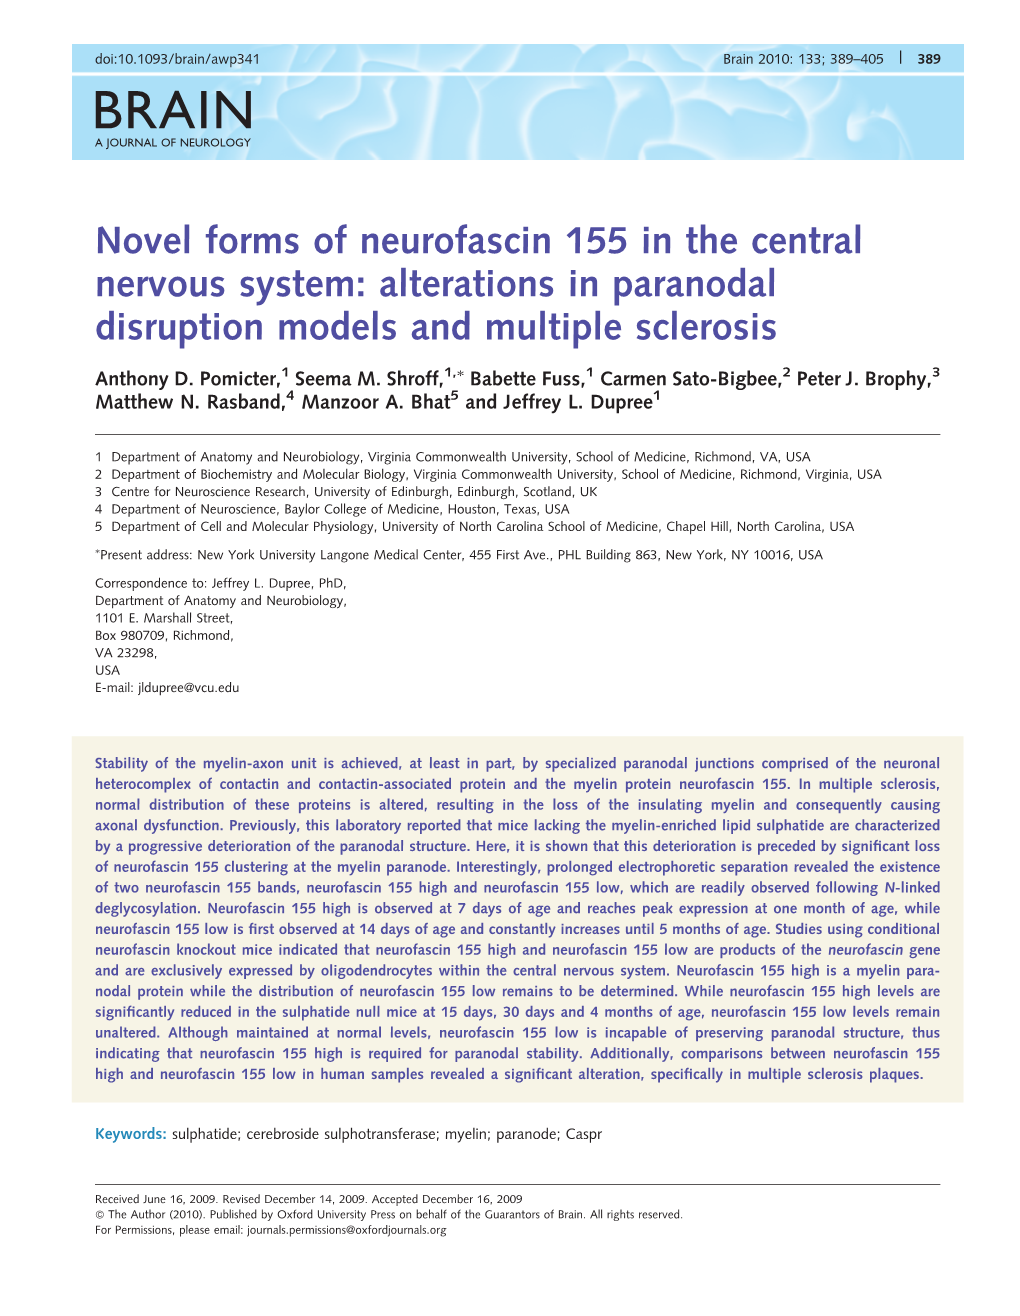 Novel Forms of Neurofascin 155 in the Central Nervous System: Alterations in Paranodal Disruption Models and Multiple Sclerosis